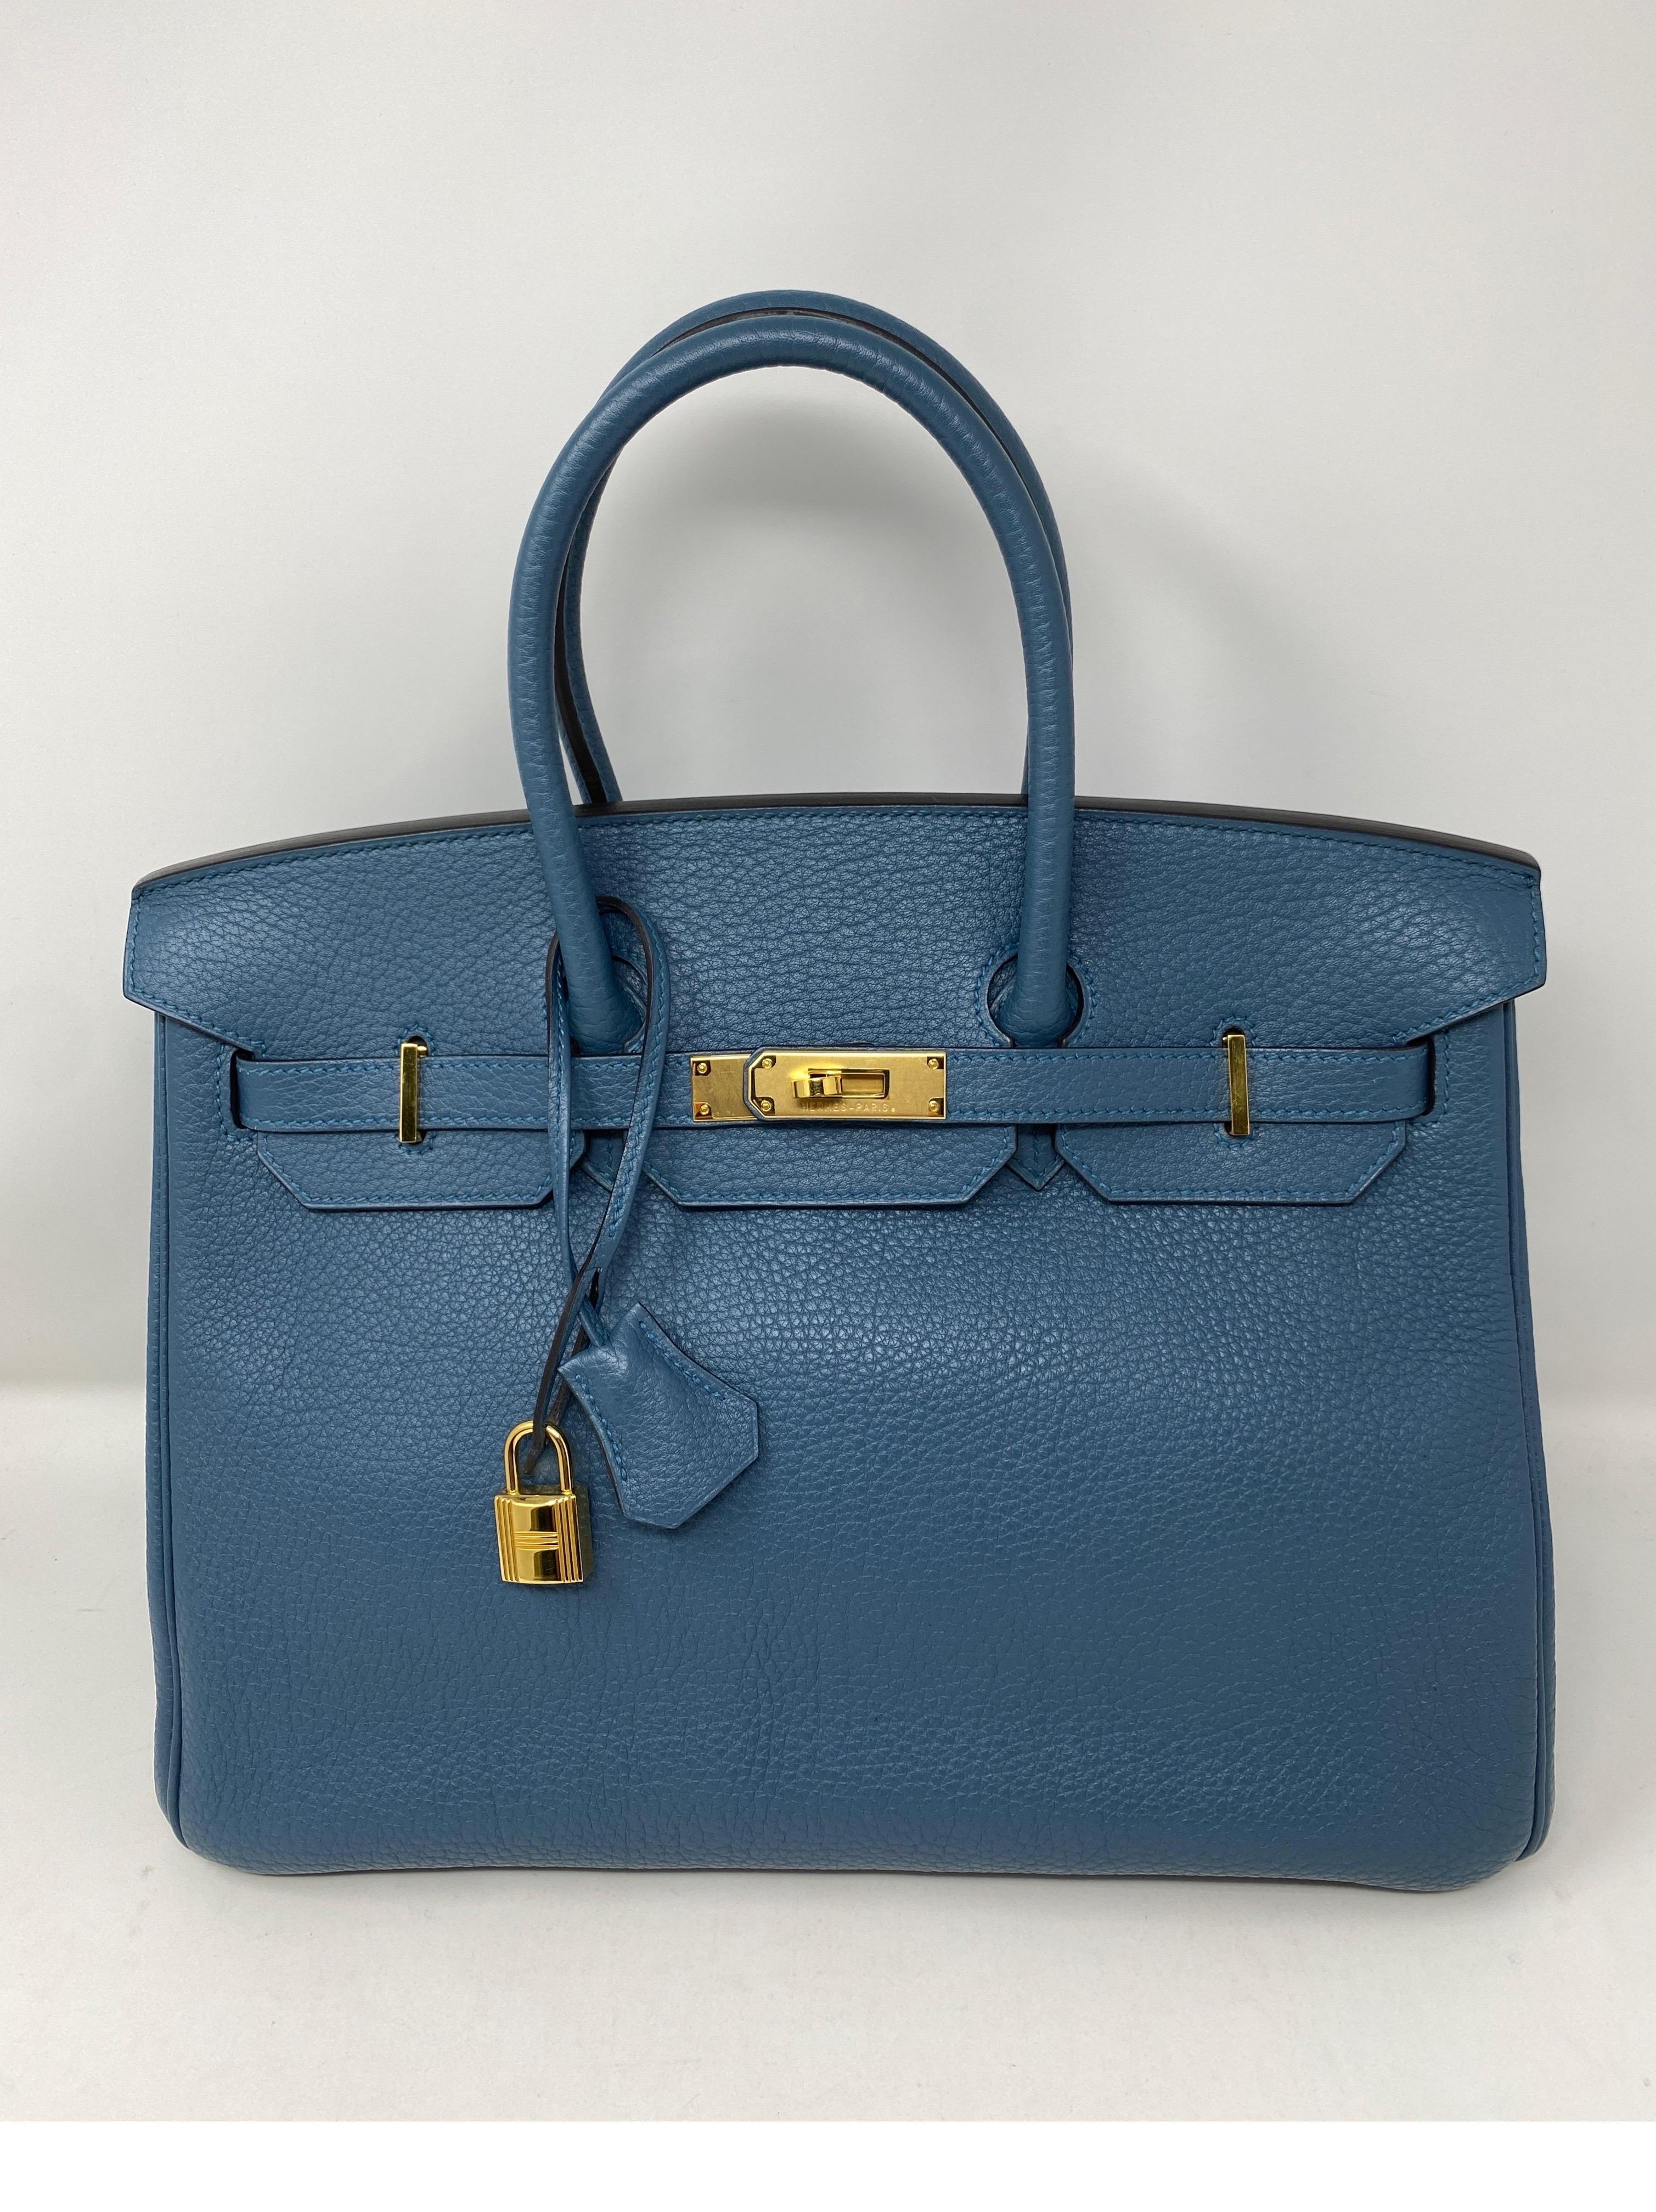 Hermes Blue Colvert Birkin Bag. Size 35. Gold hardware. Excellent like new condition. X stamp. Beautiful neutral blue color with gold. Plastic still on hardware. Great investment bag. Includes clochette, lock, keys, and dust cover. Guaranteed